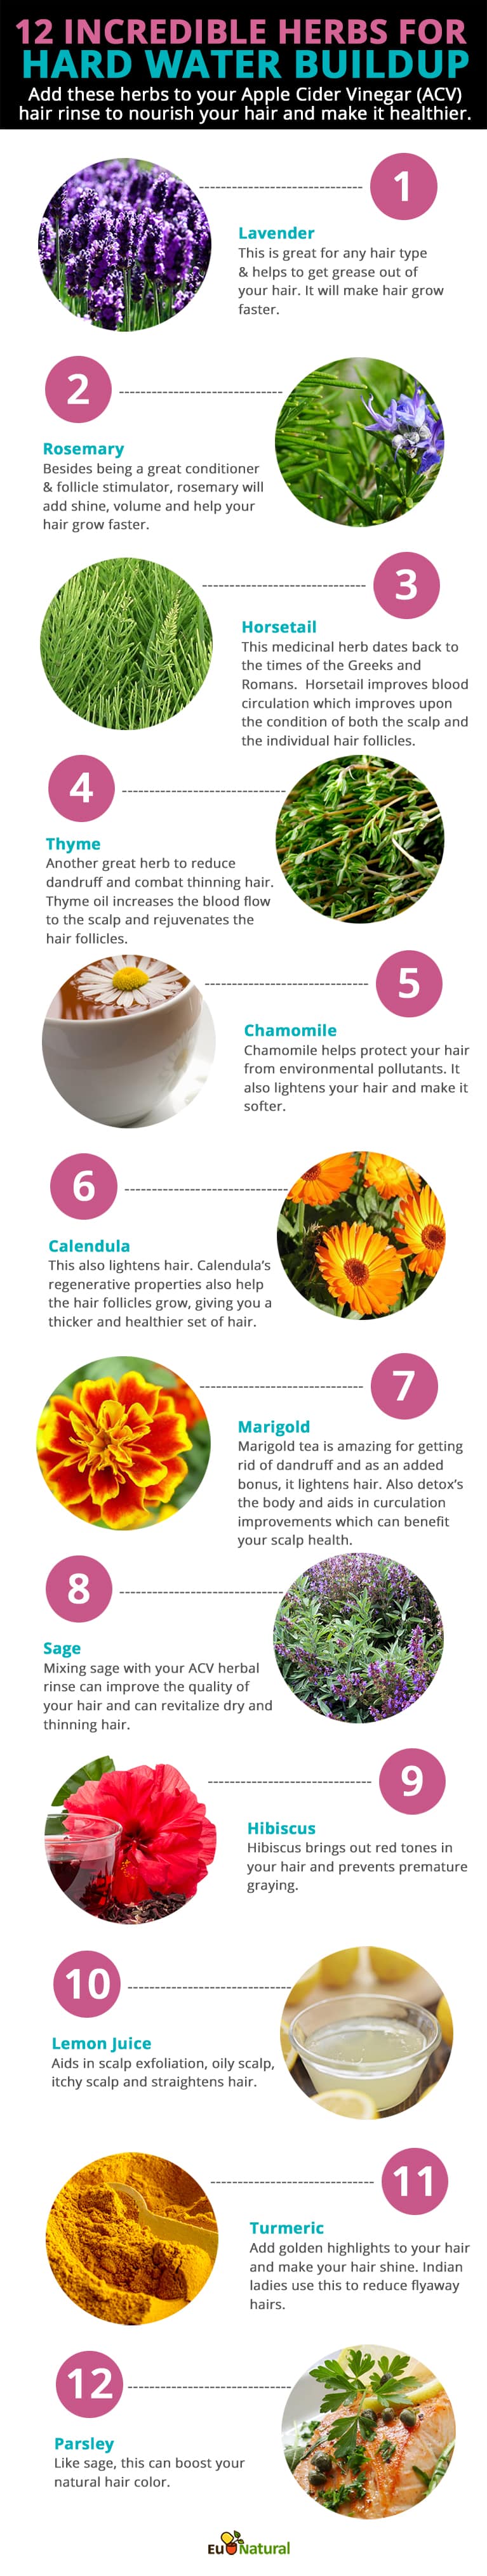 herbs-for-hard-water-buildup-infographic-final-1